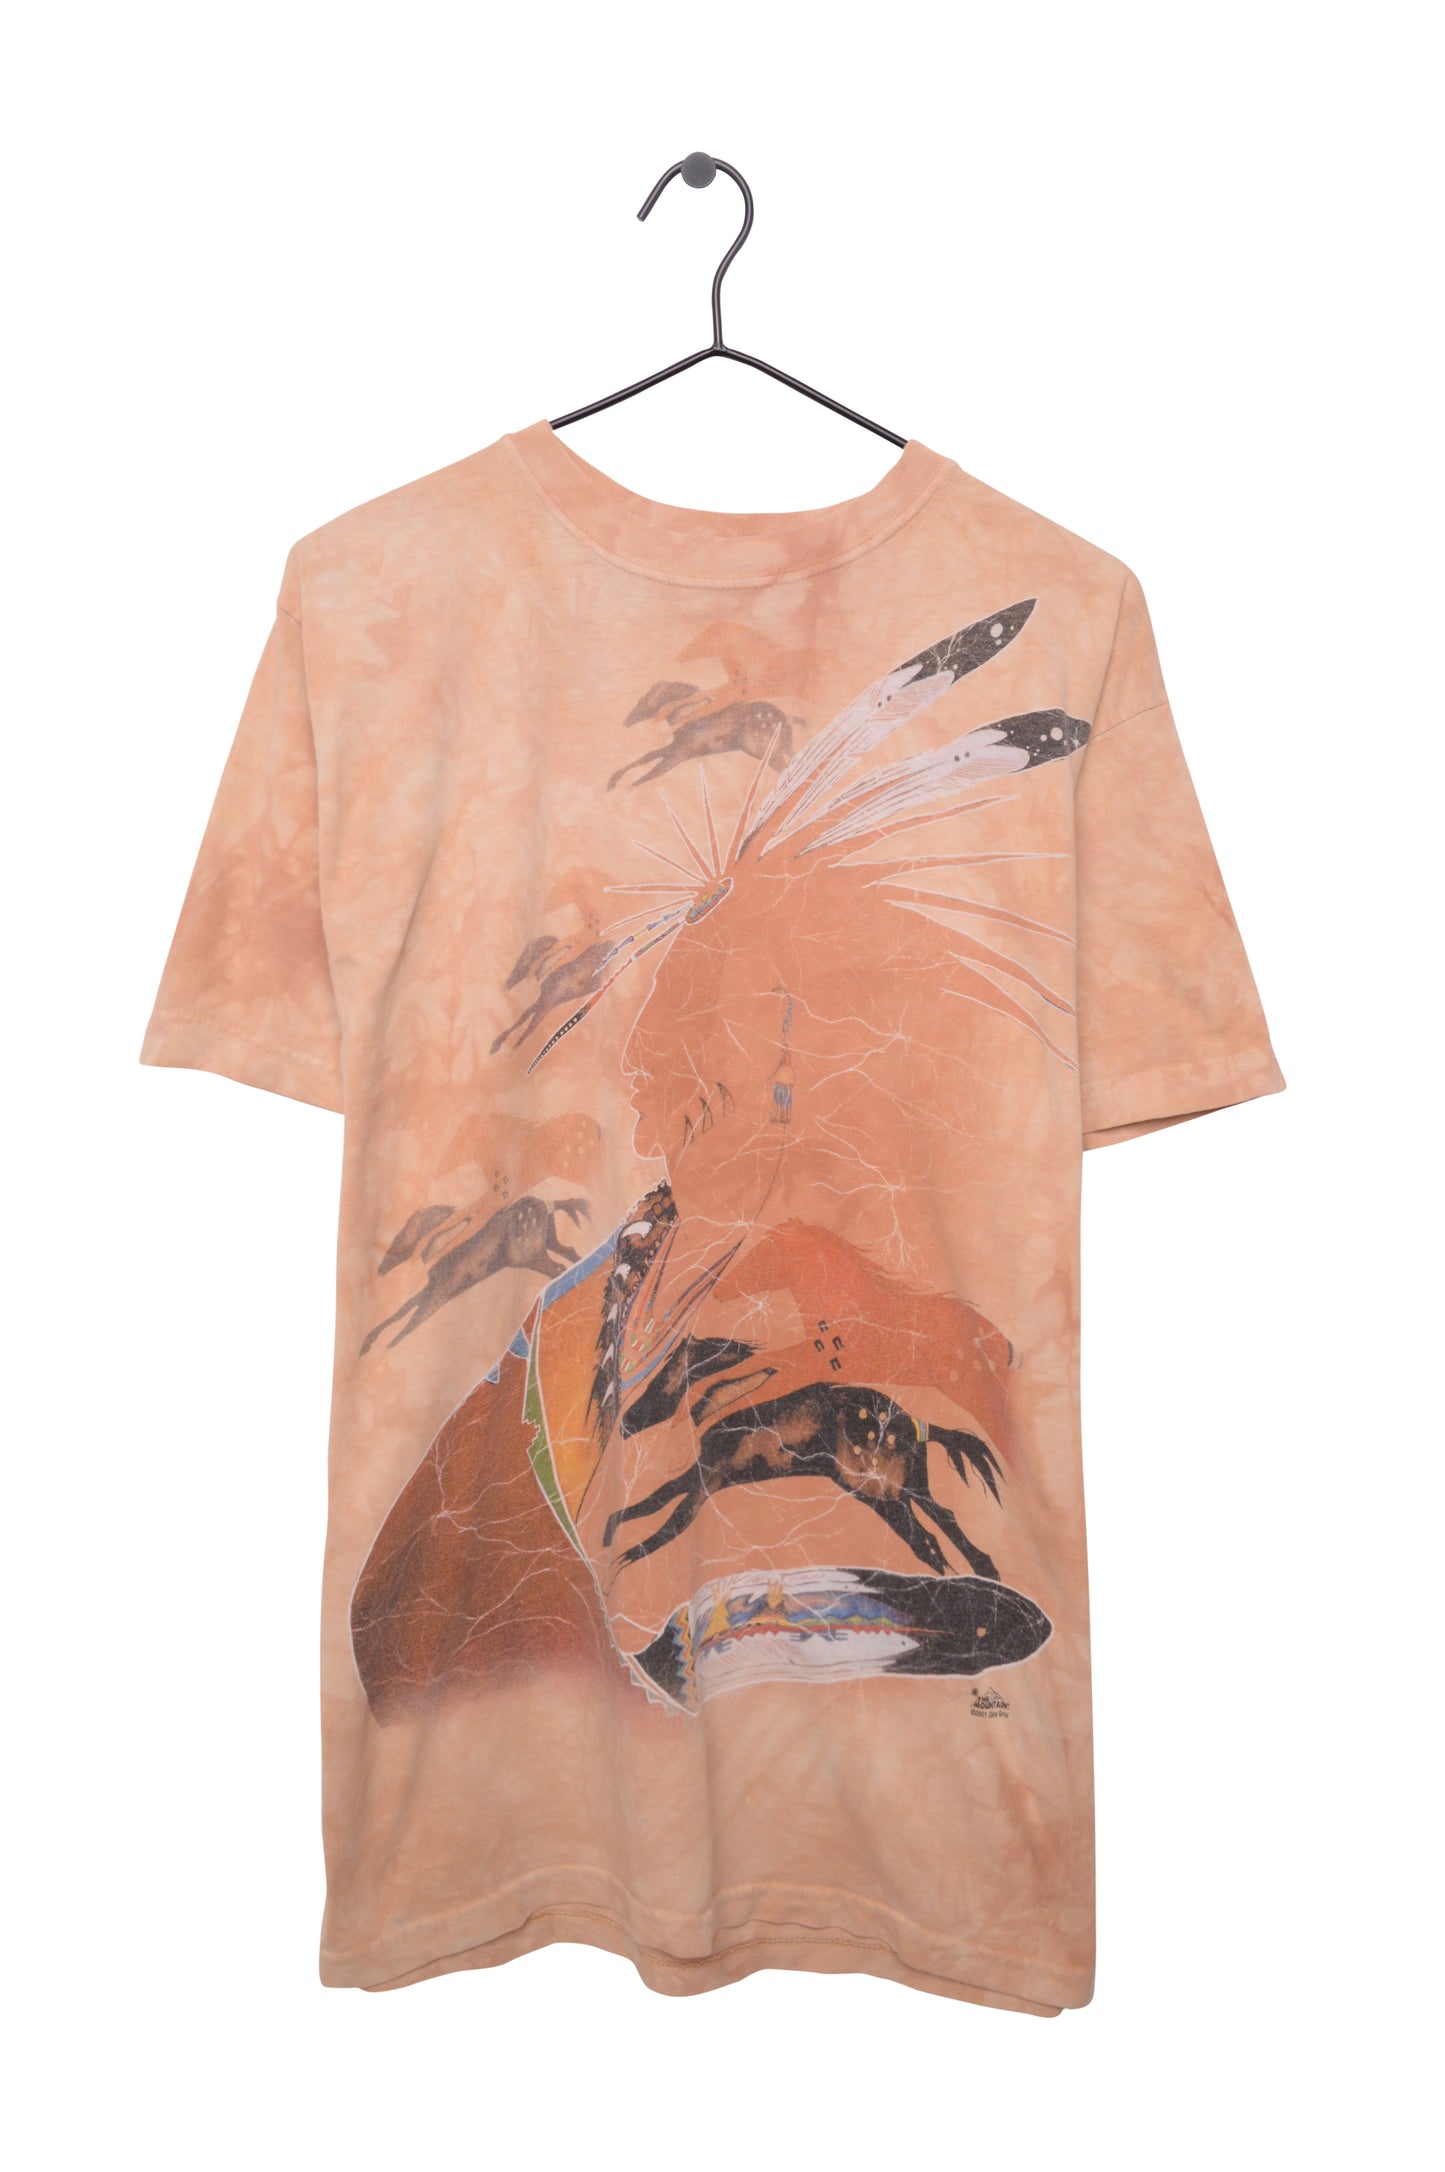 2001 Native American All-Over Tee